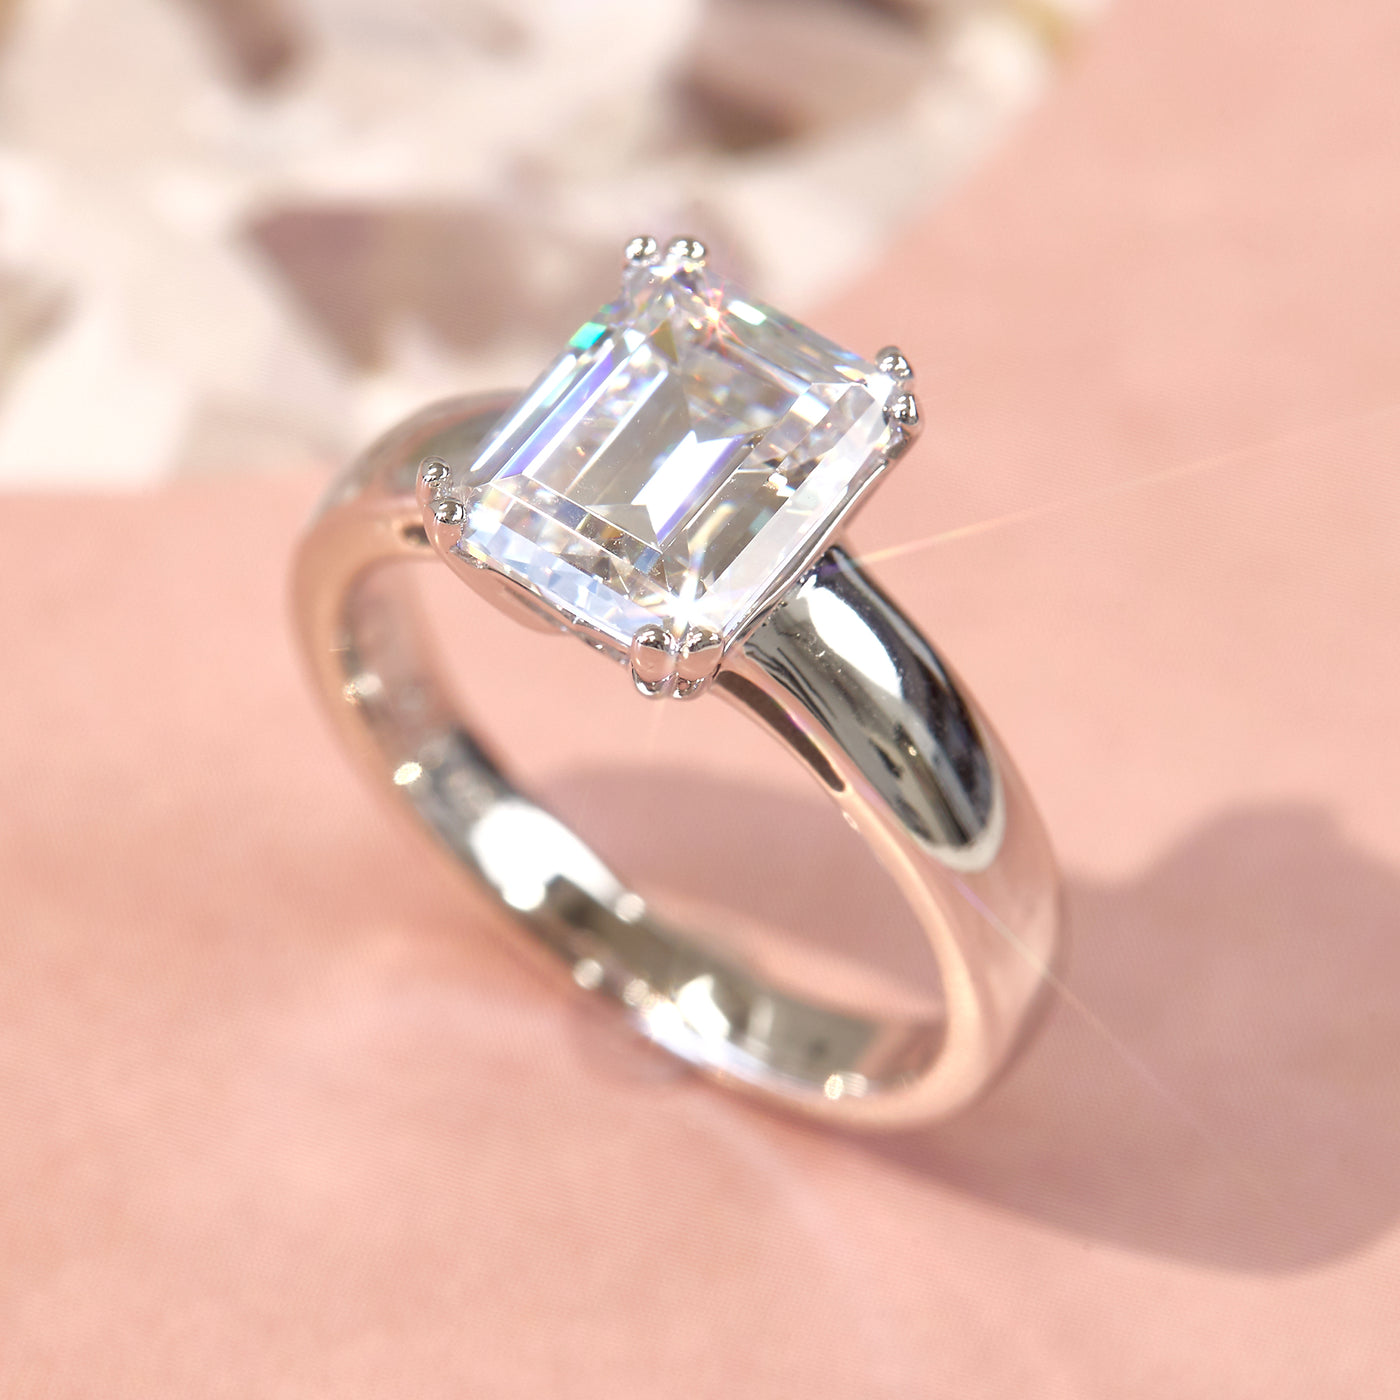 4 CT Emerald Cut Solitaire Ring, Platinum Plated Sterling Silver